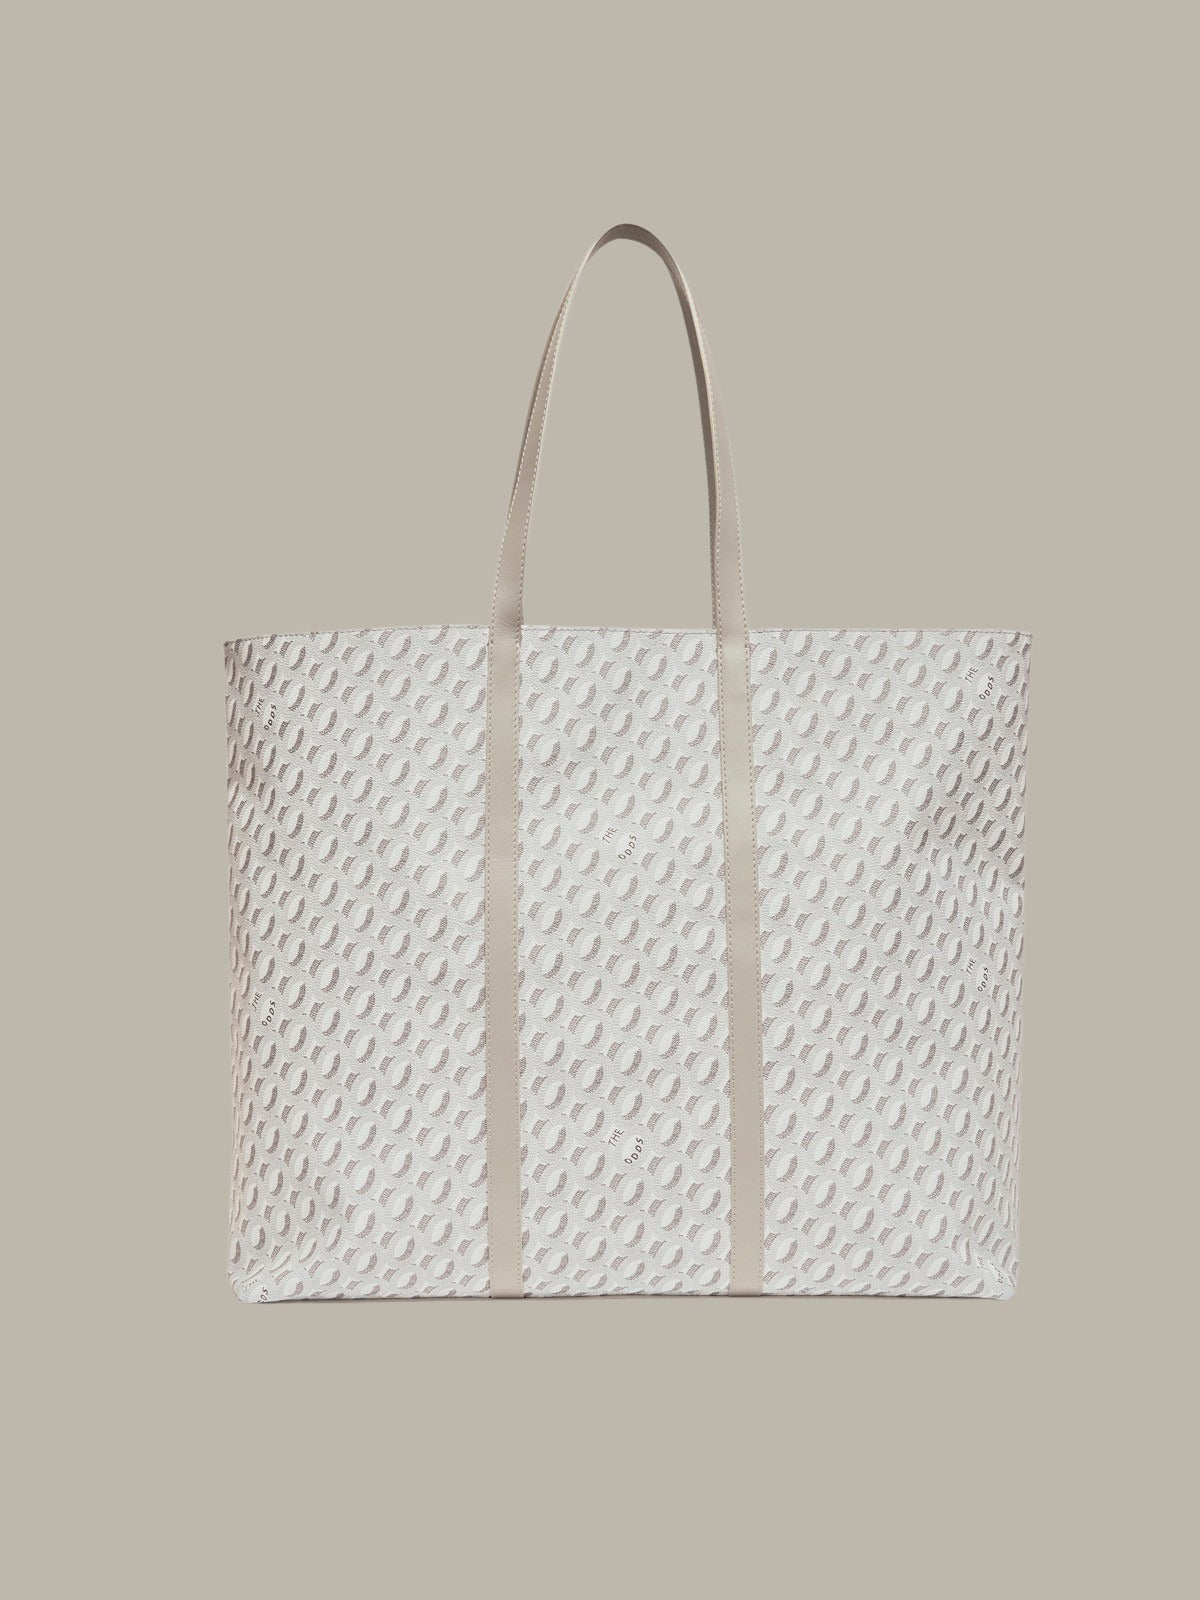 Totes Odd Tote Bag Marble White-Grey/ LMTD edition